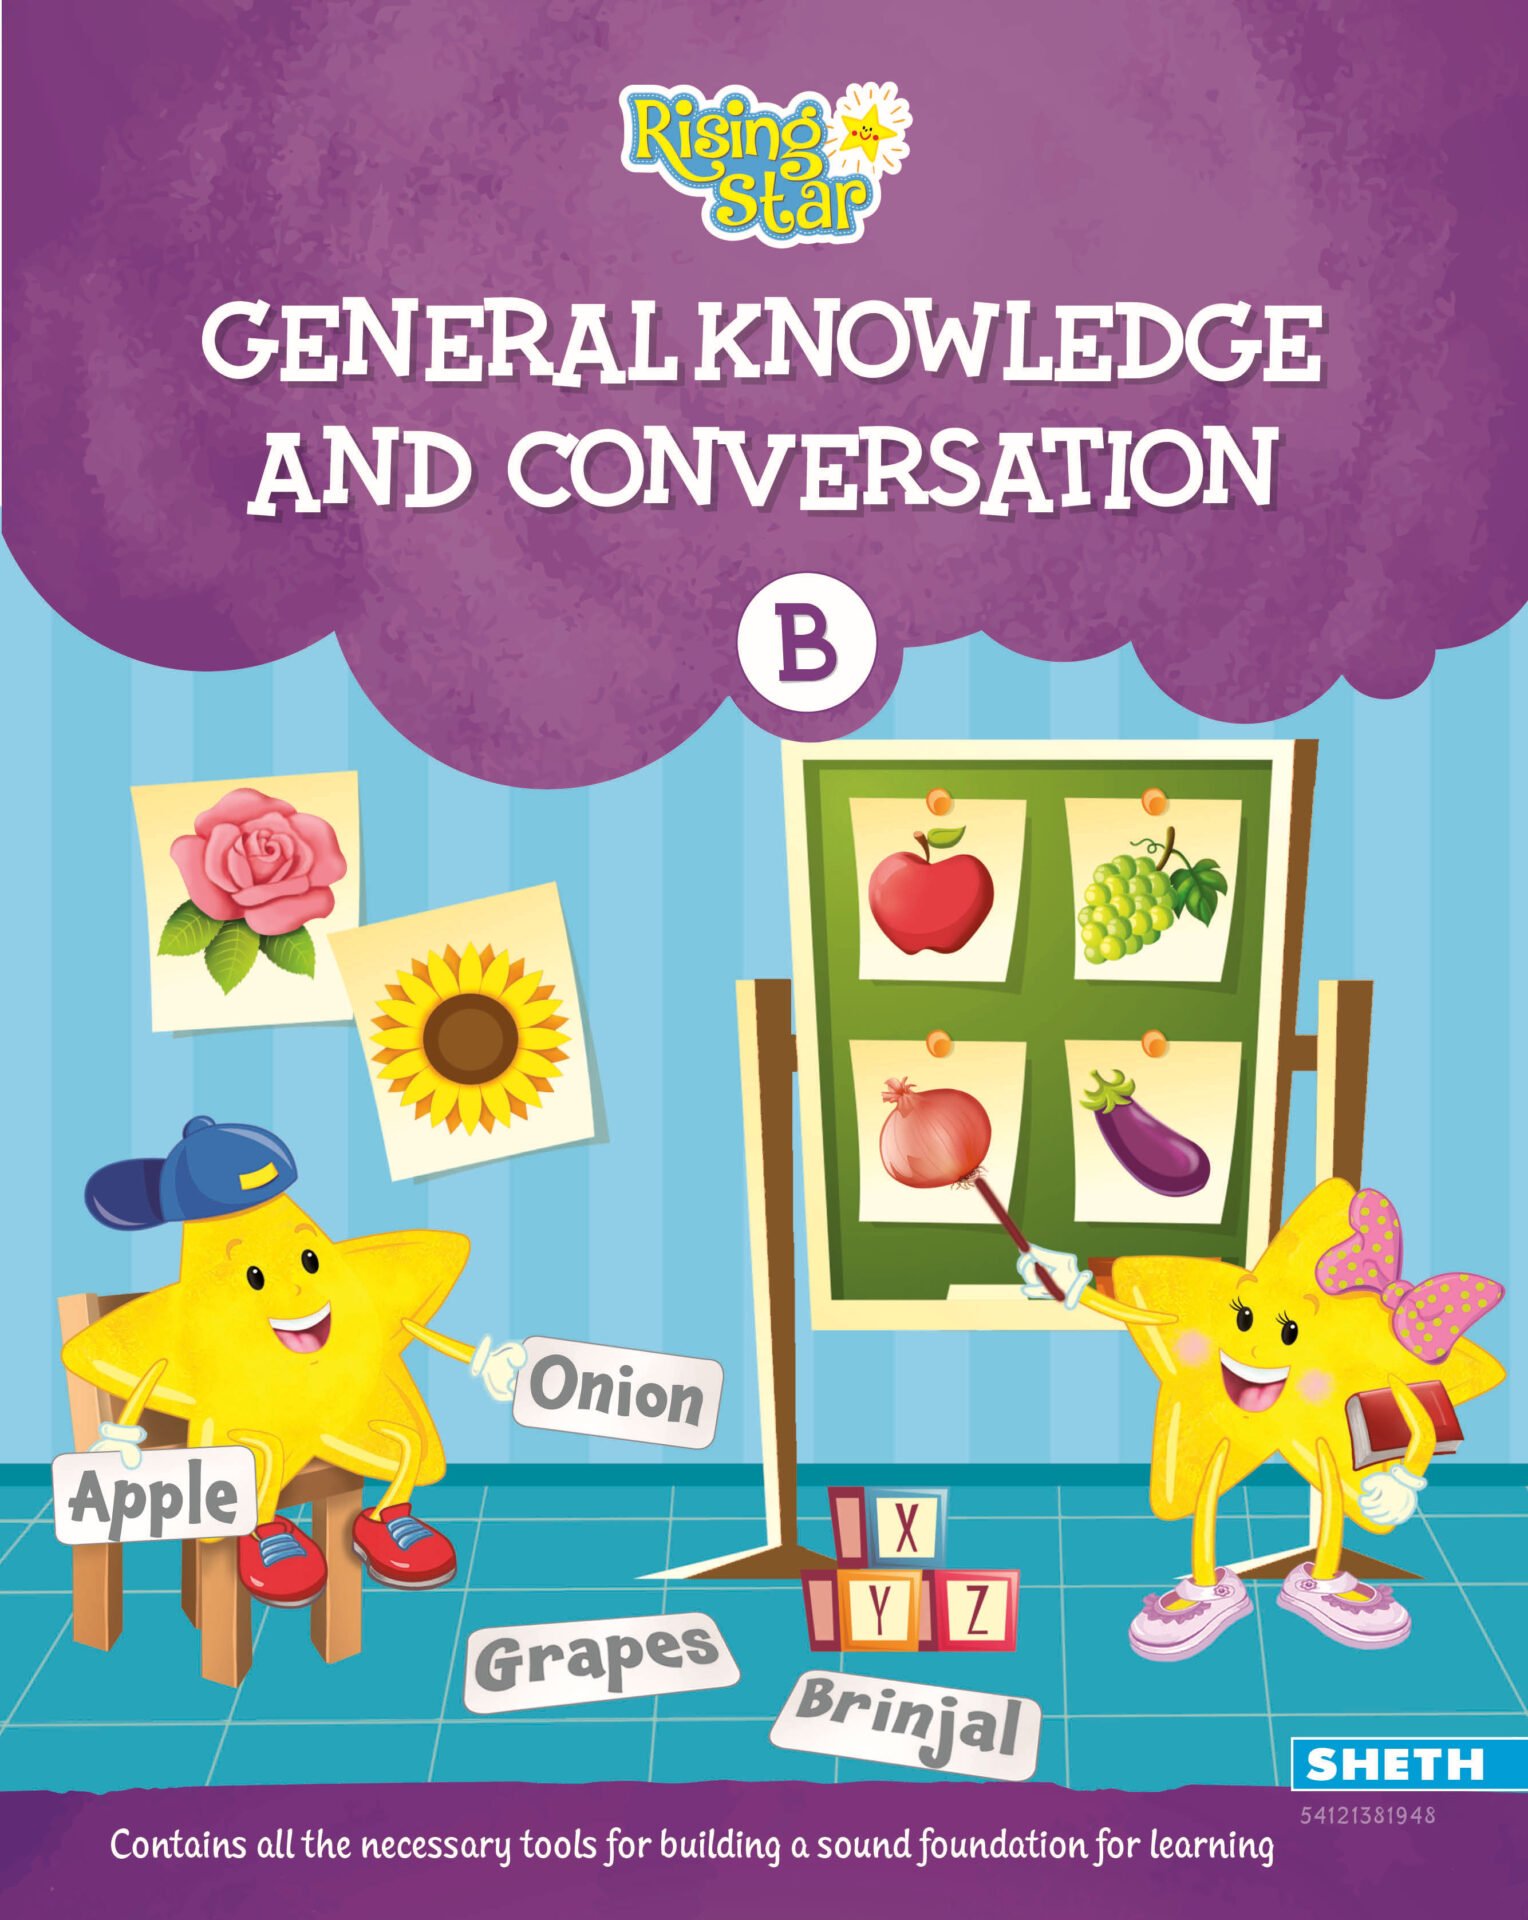 Rising Star General Knowledge and Conversation B 1 1